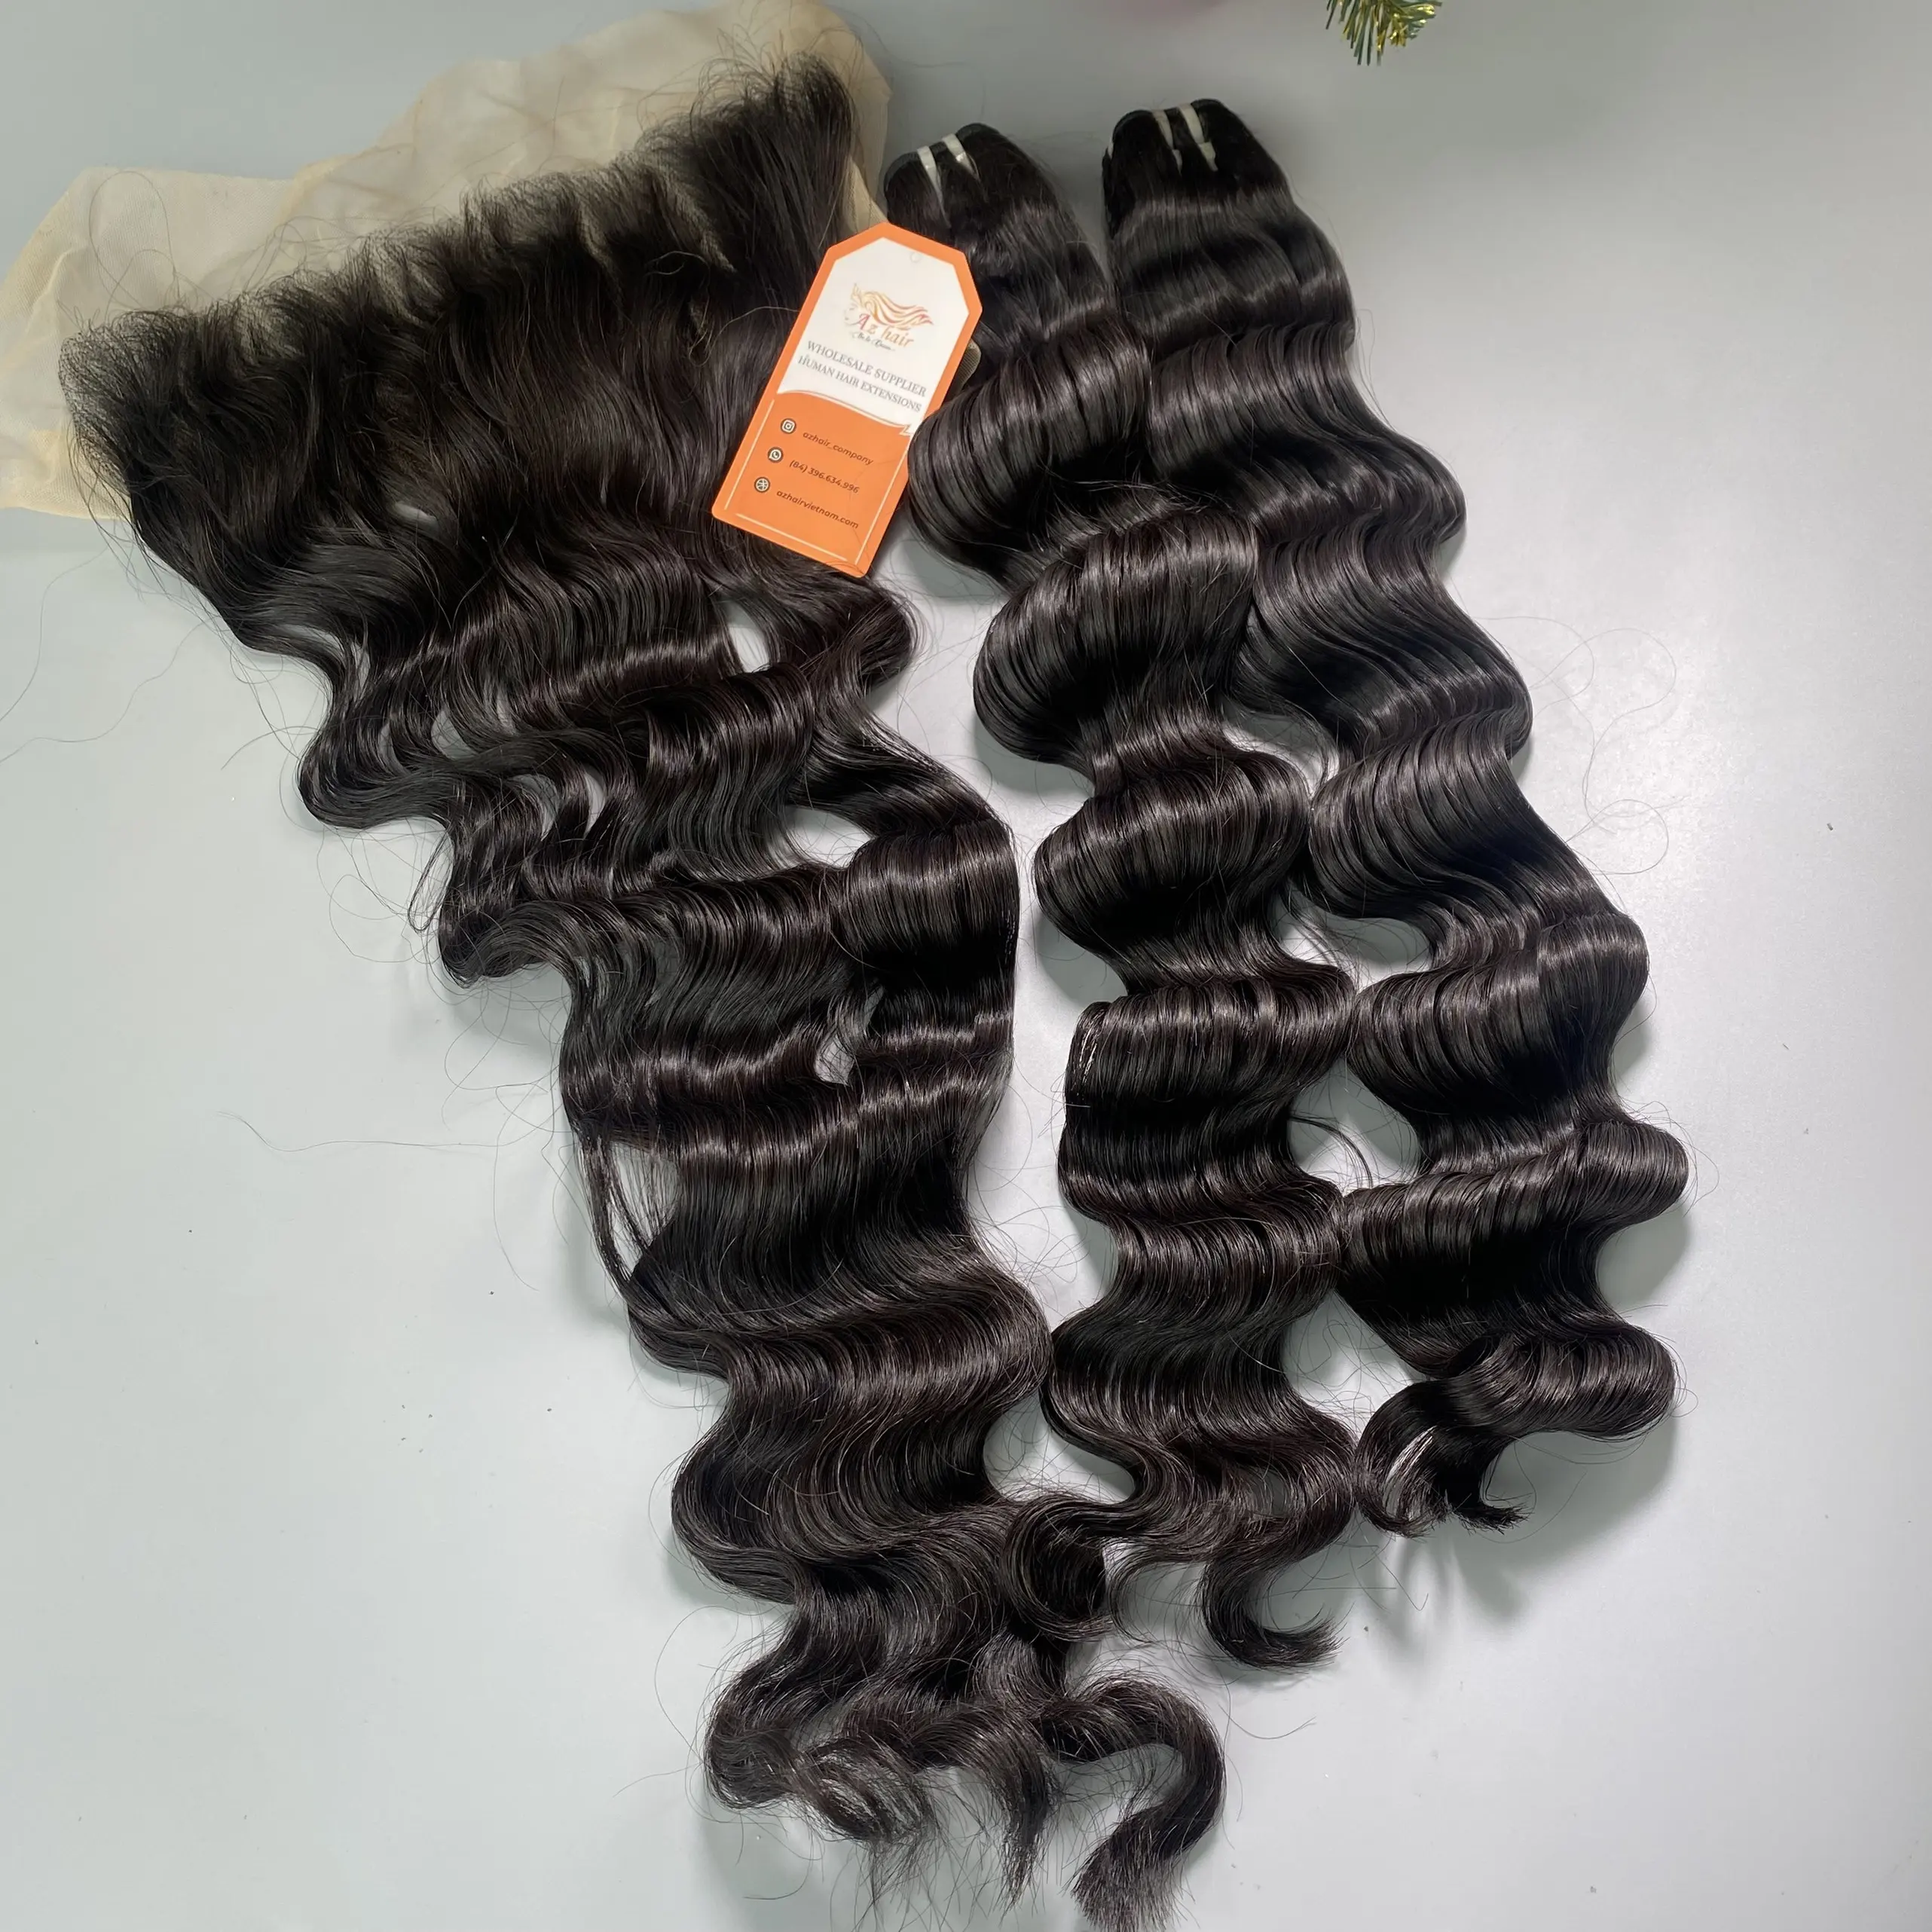 New Texture Double Drawn Weft Loose Wavy Hair Extensions Hair 100% Pure Raw Unprocessed Virgin Raw Human Hair Vietnamese